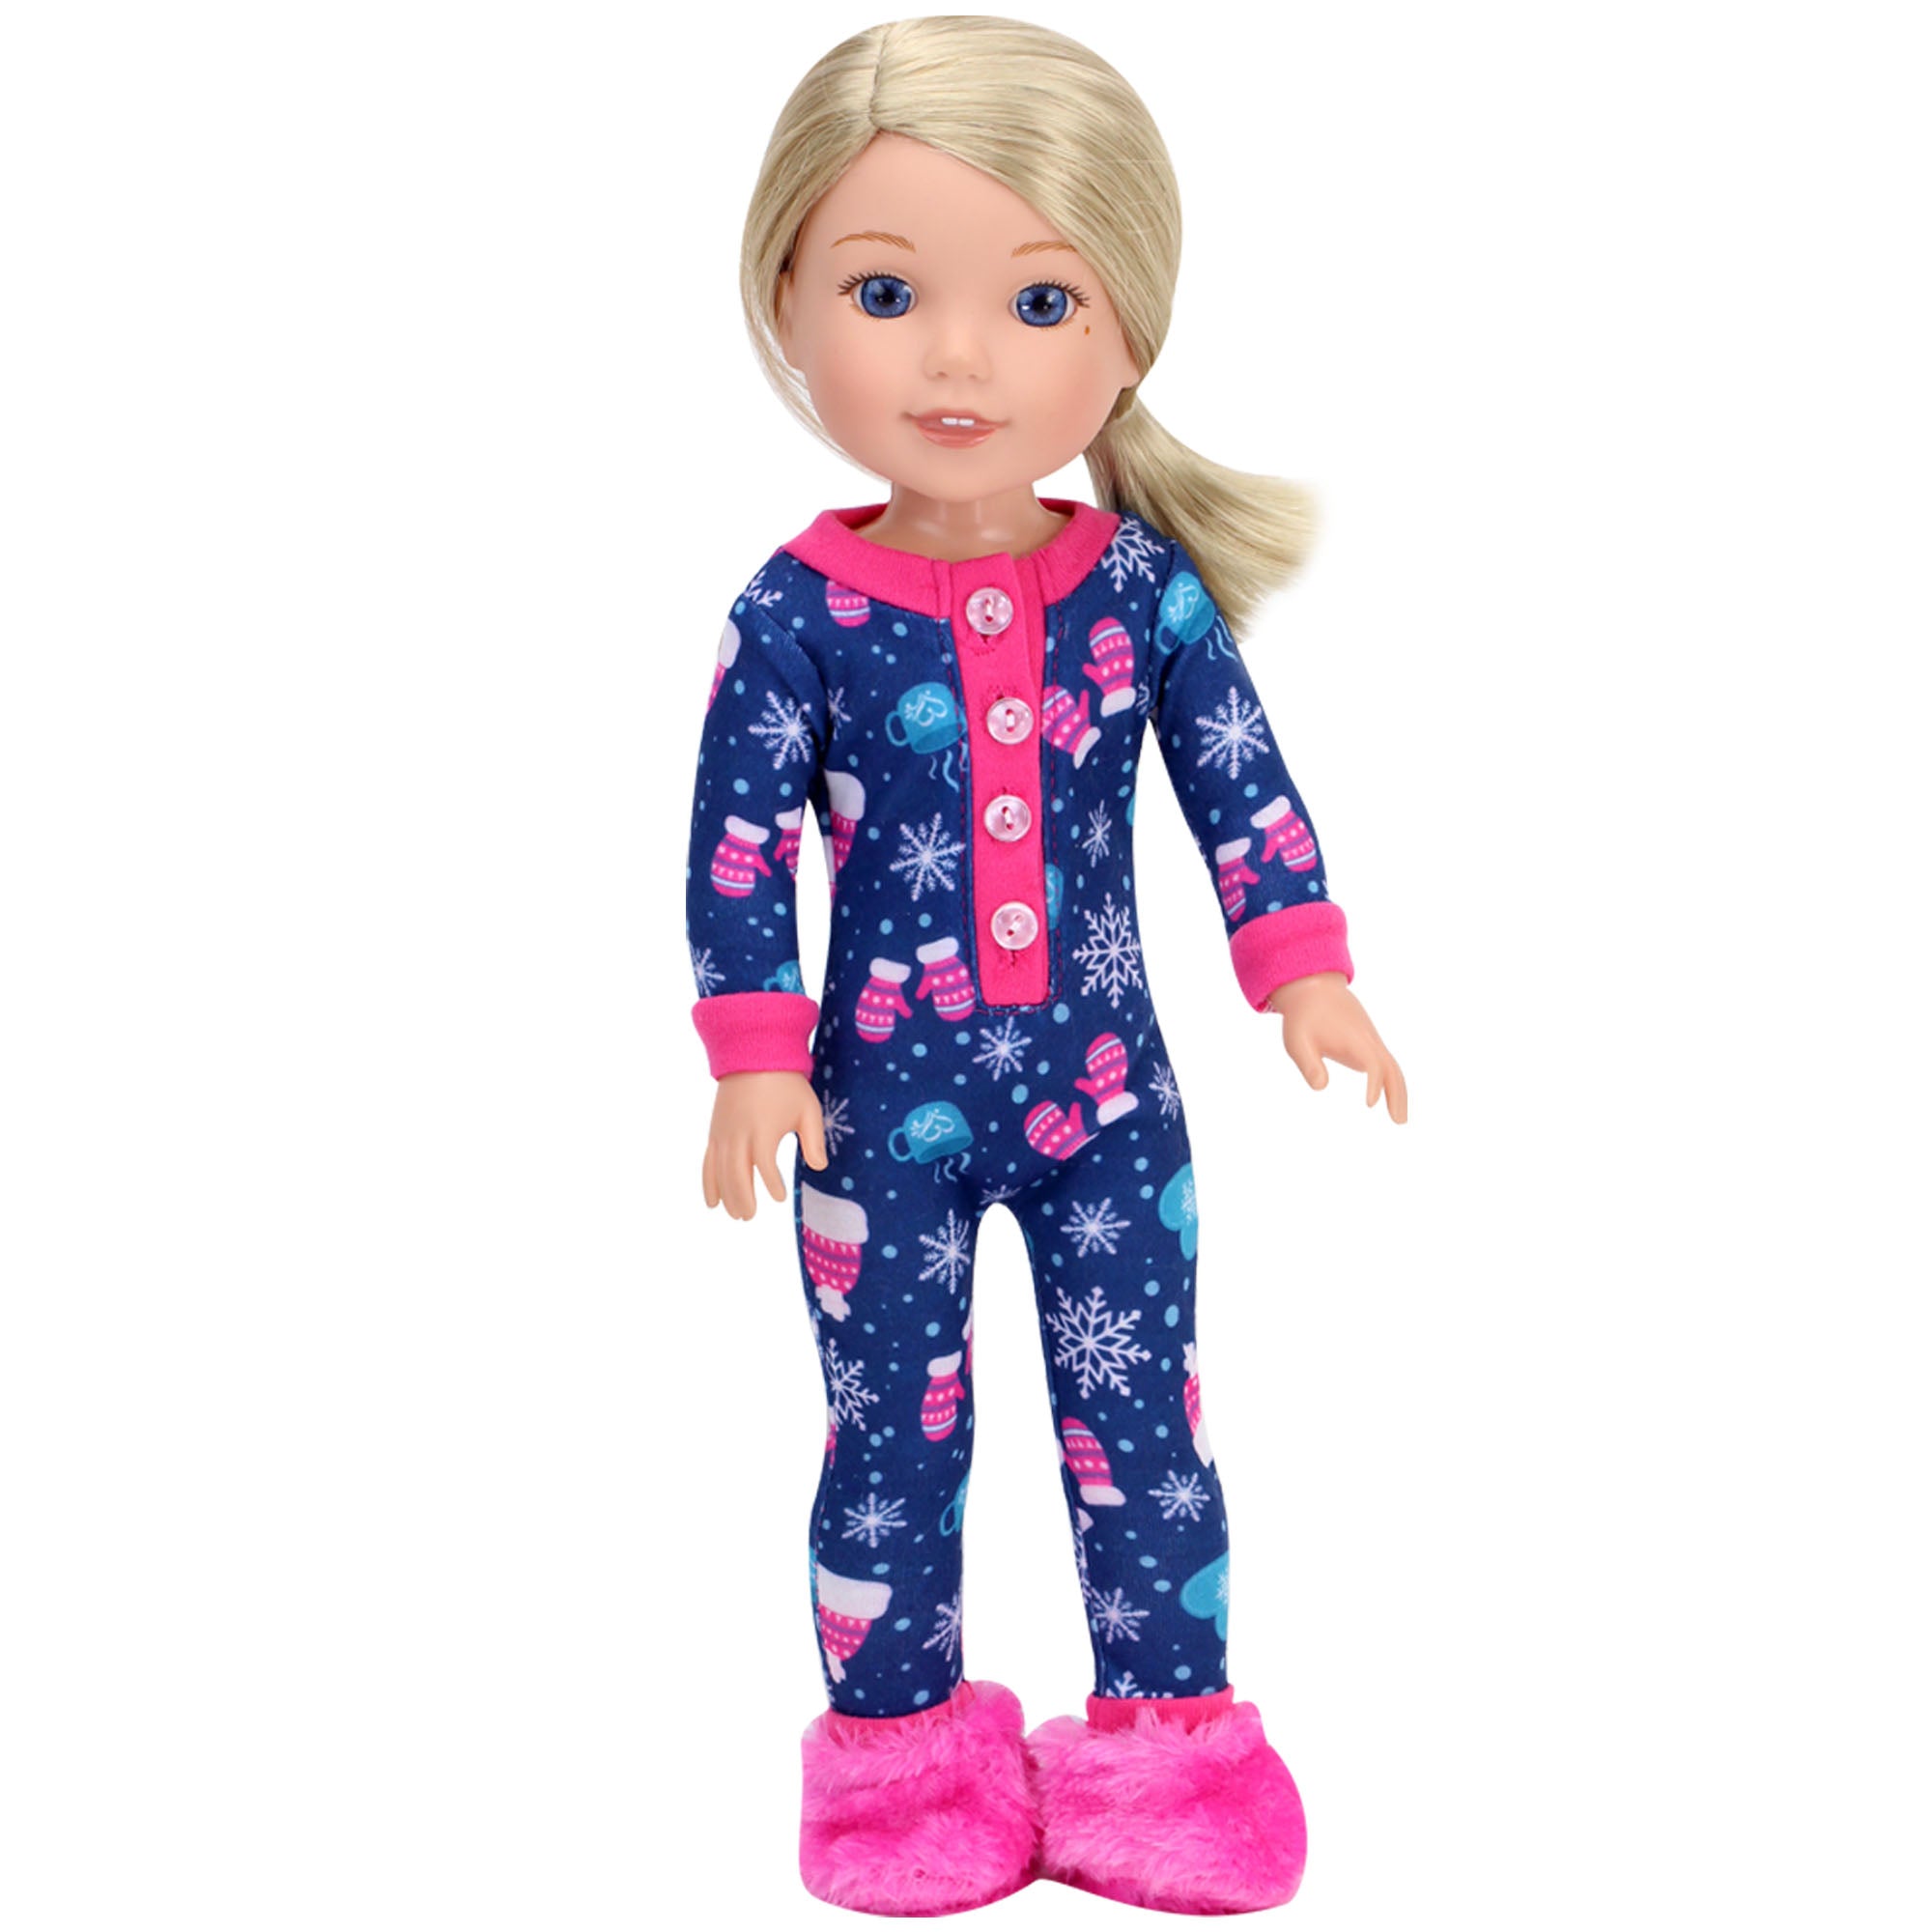 Pink Doll's Outfit One Piece Pajama